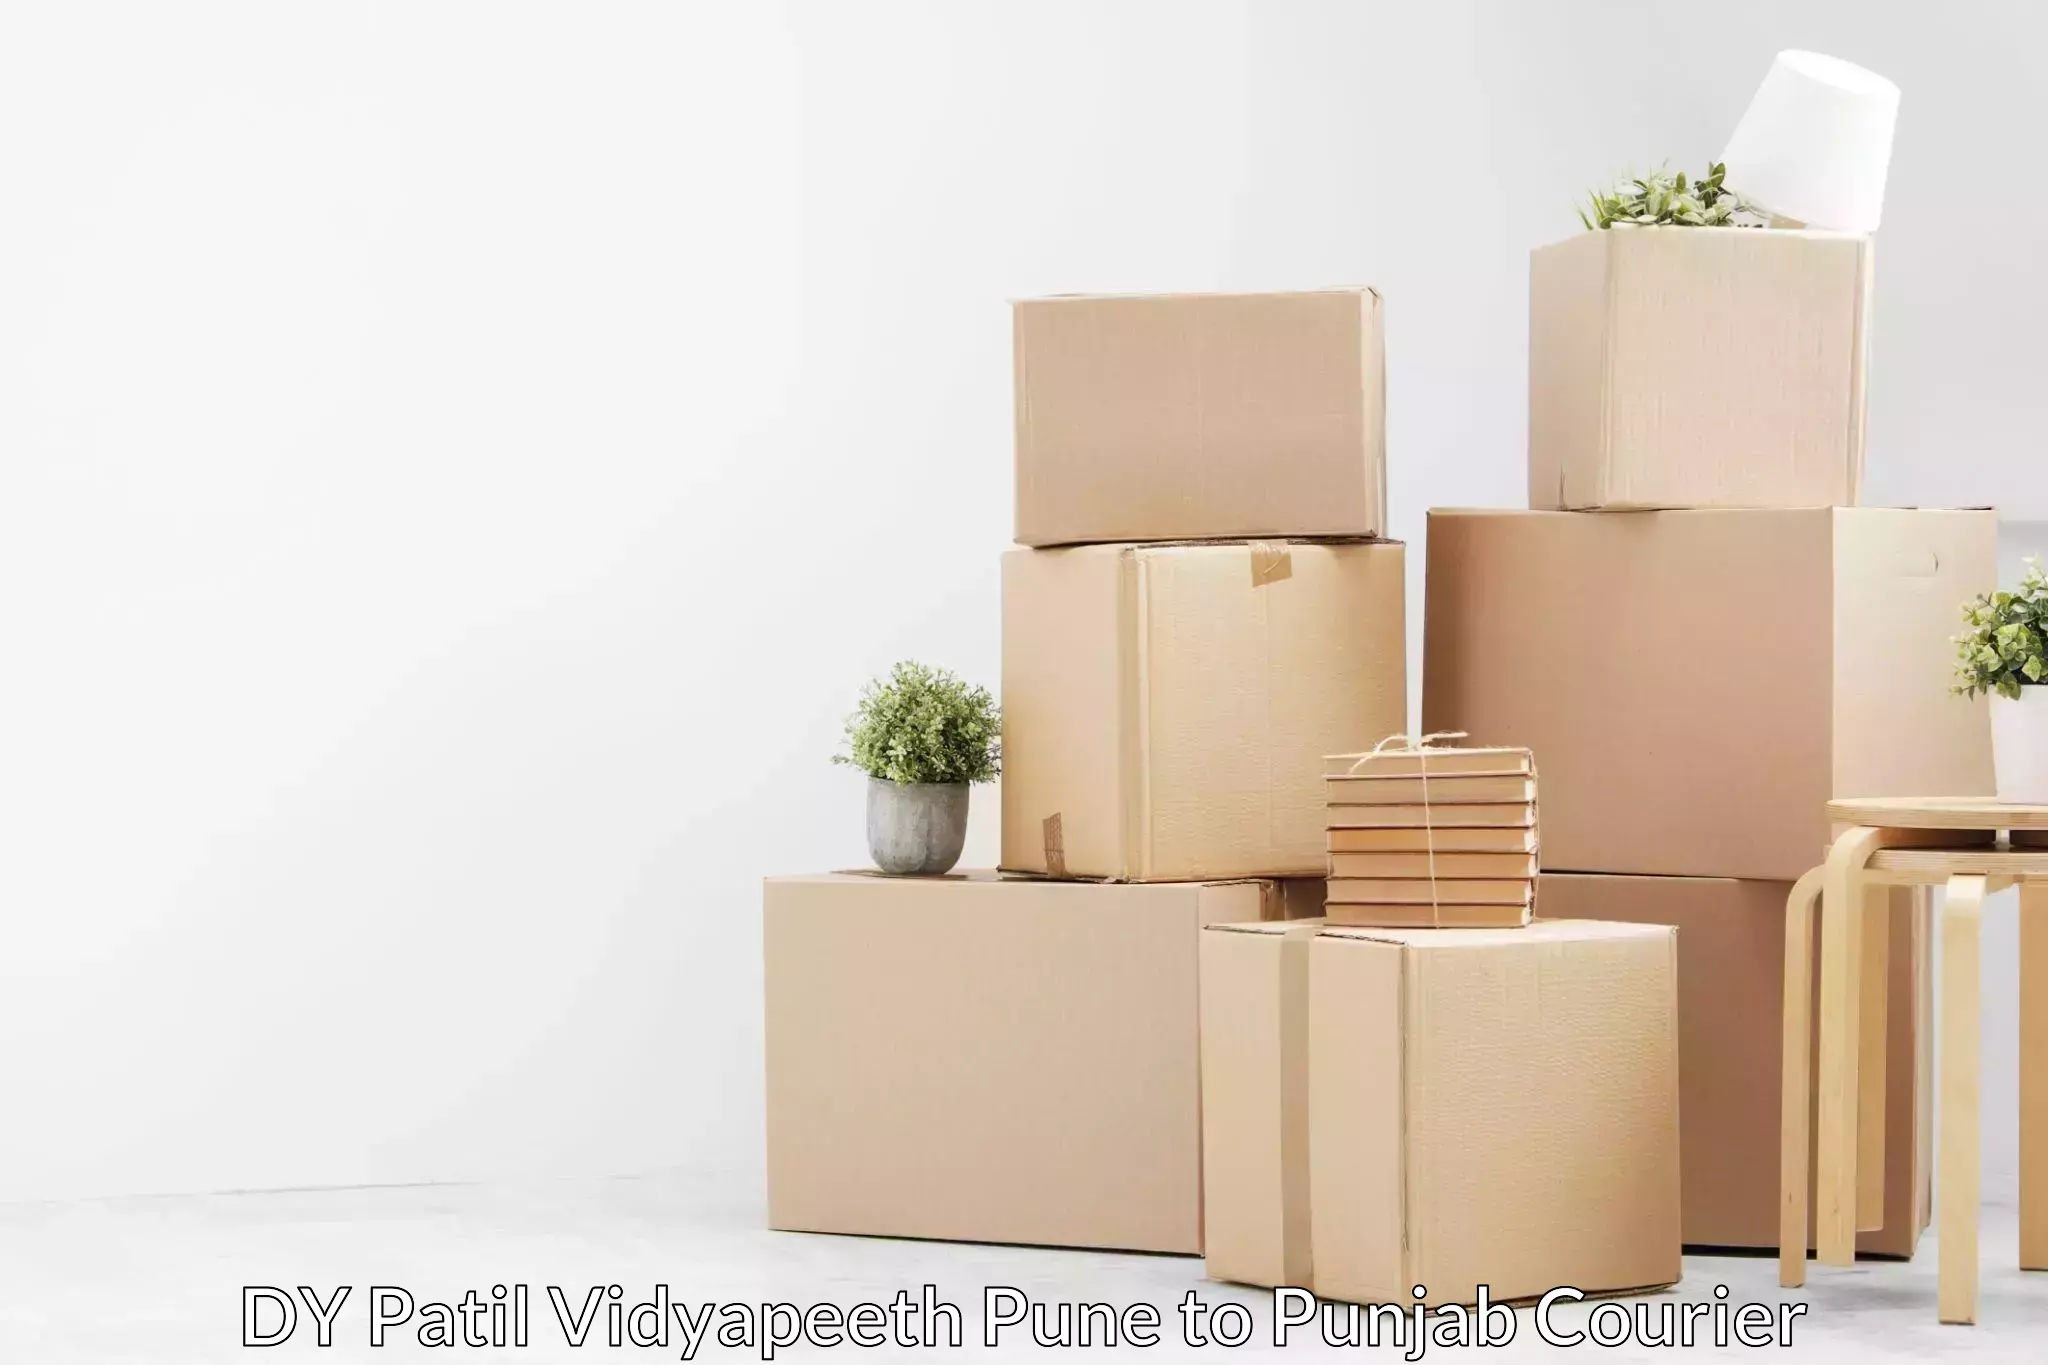 Hassle-free relocation DY Patil Vidyapeeth Pune to Mansa